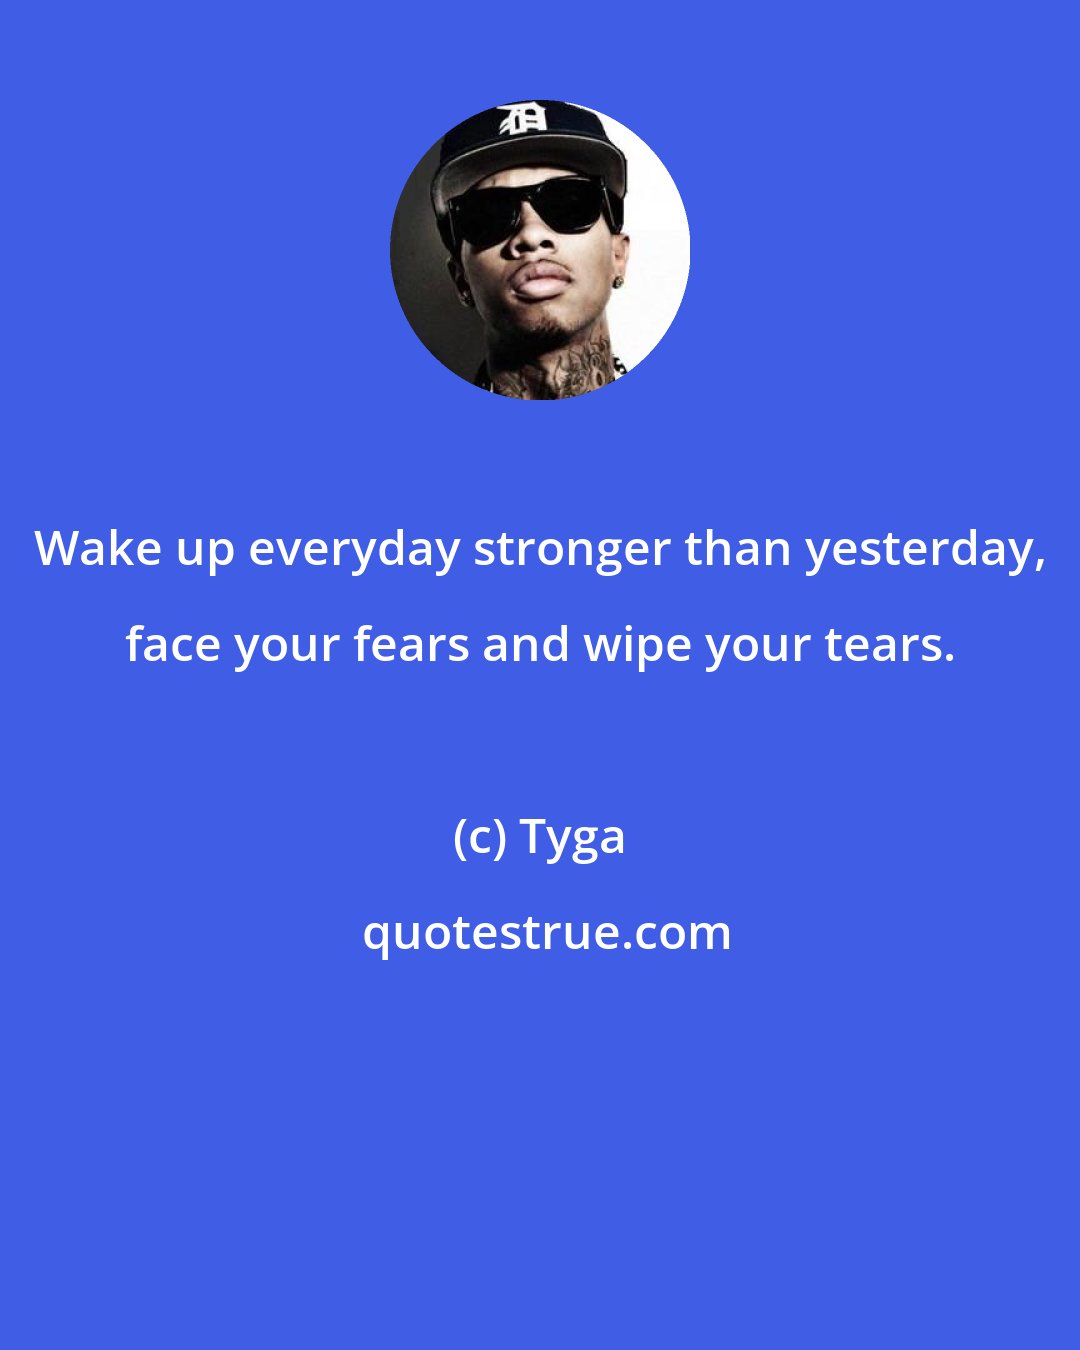 Tyga: Wake up everyday stronger than yesterday, face your fears and wipe your tears.